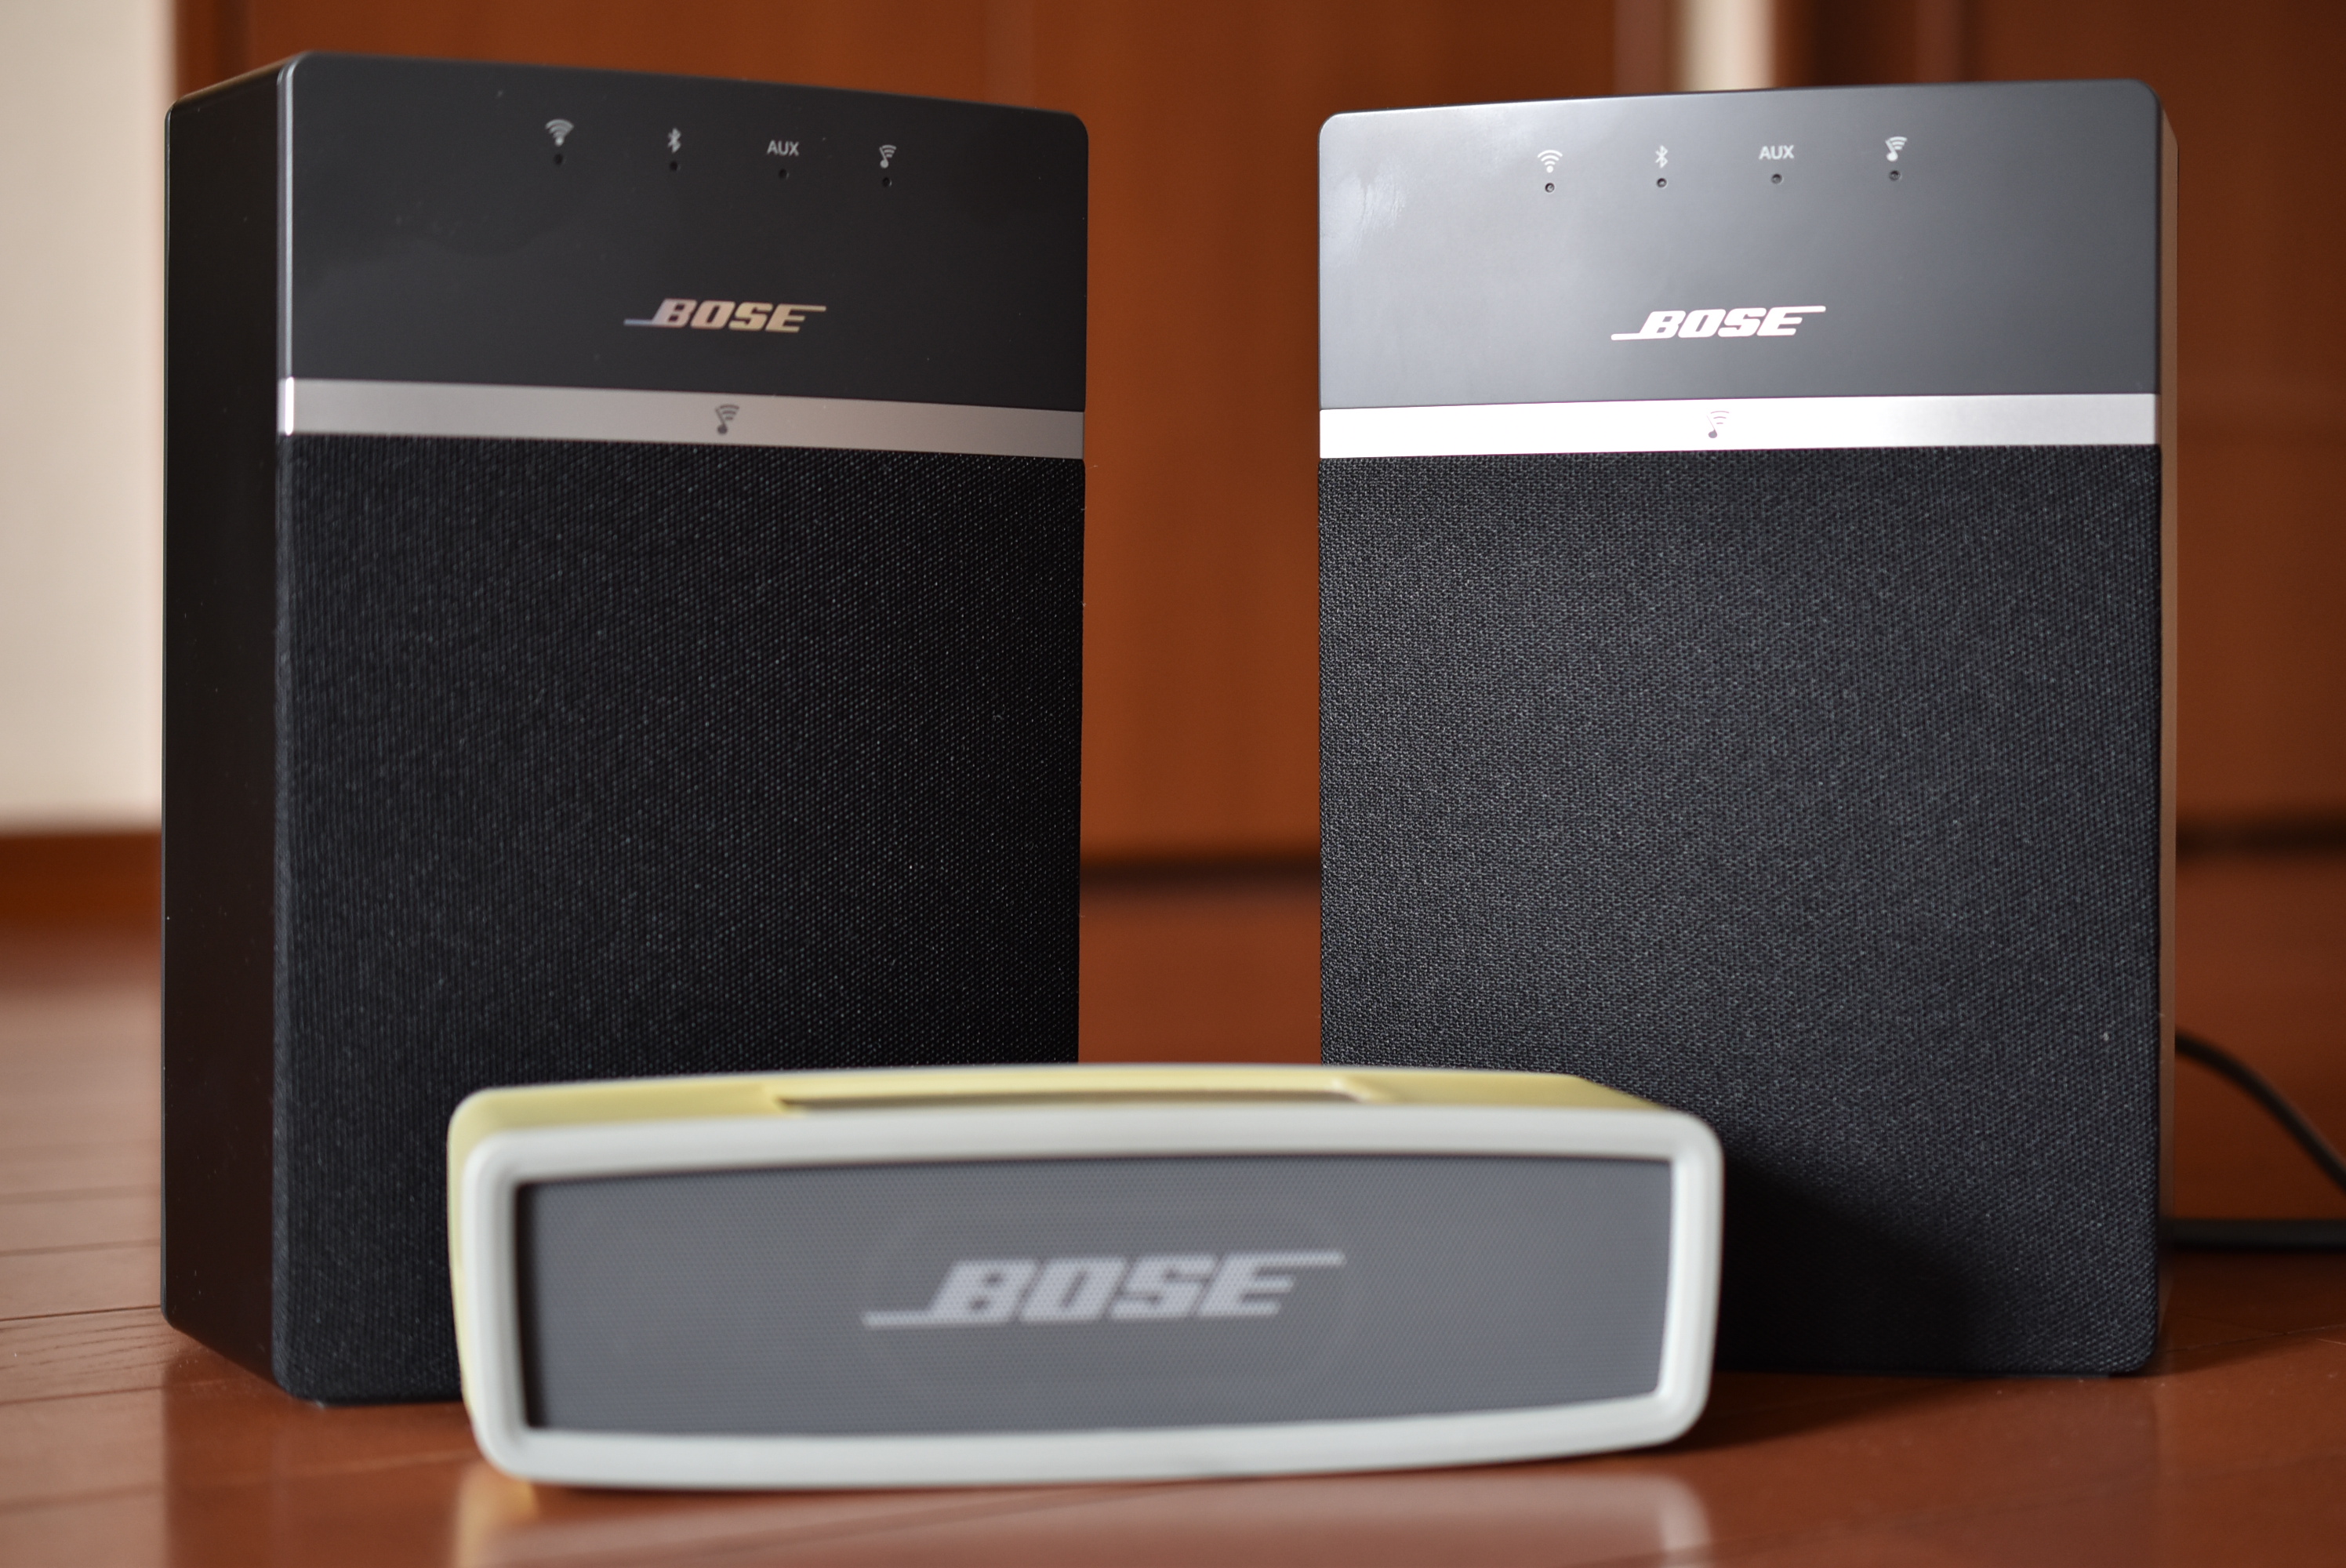 Permanent Børns dag Skriv en rapport Bose SoundTouch 10 のステレオペア機能を試す！SoundTouch ってすごくイイ！ - モノ好き。ブログ